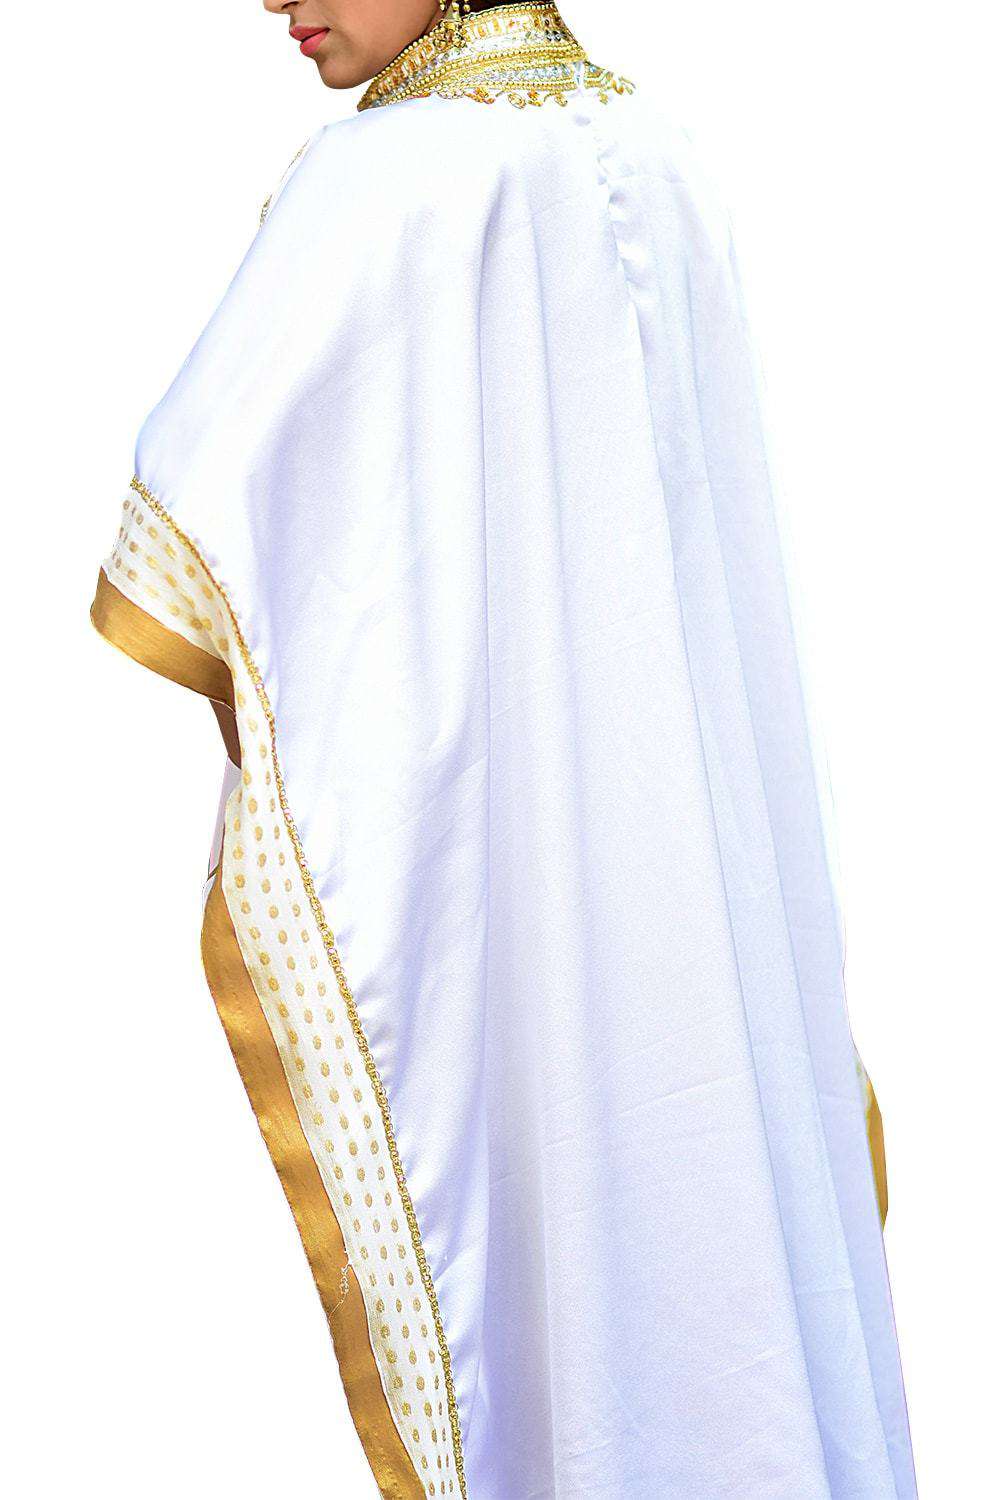 Dazzling White and Gold Color Fashionable Kaftan - One Size